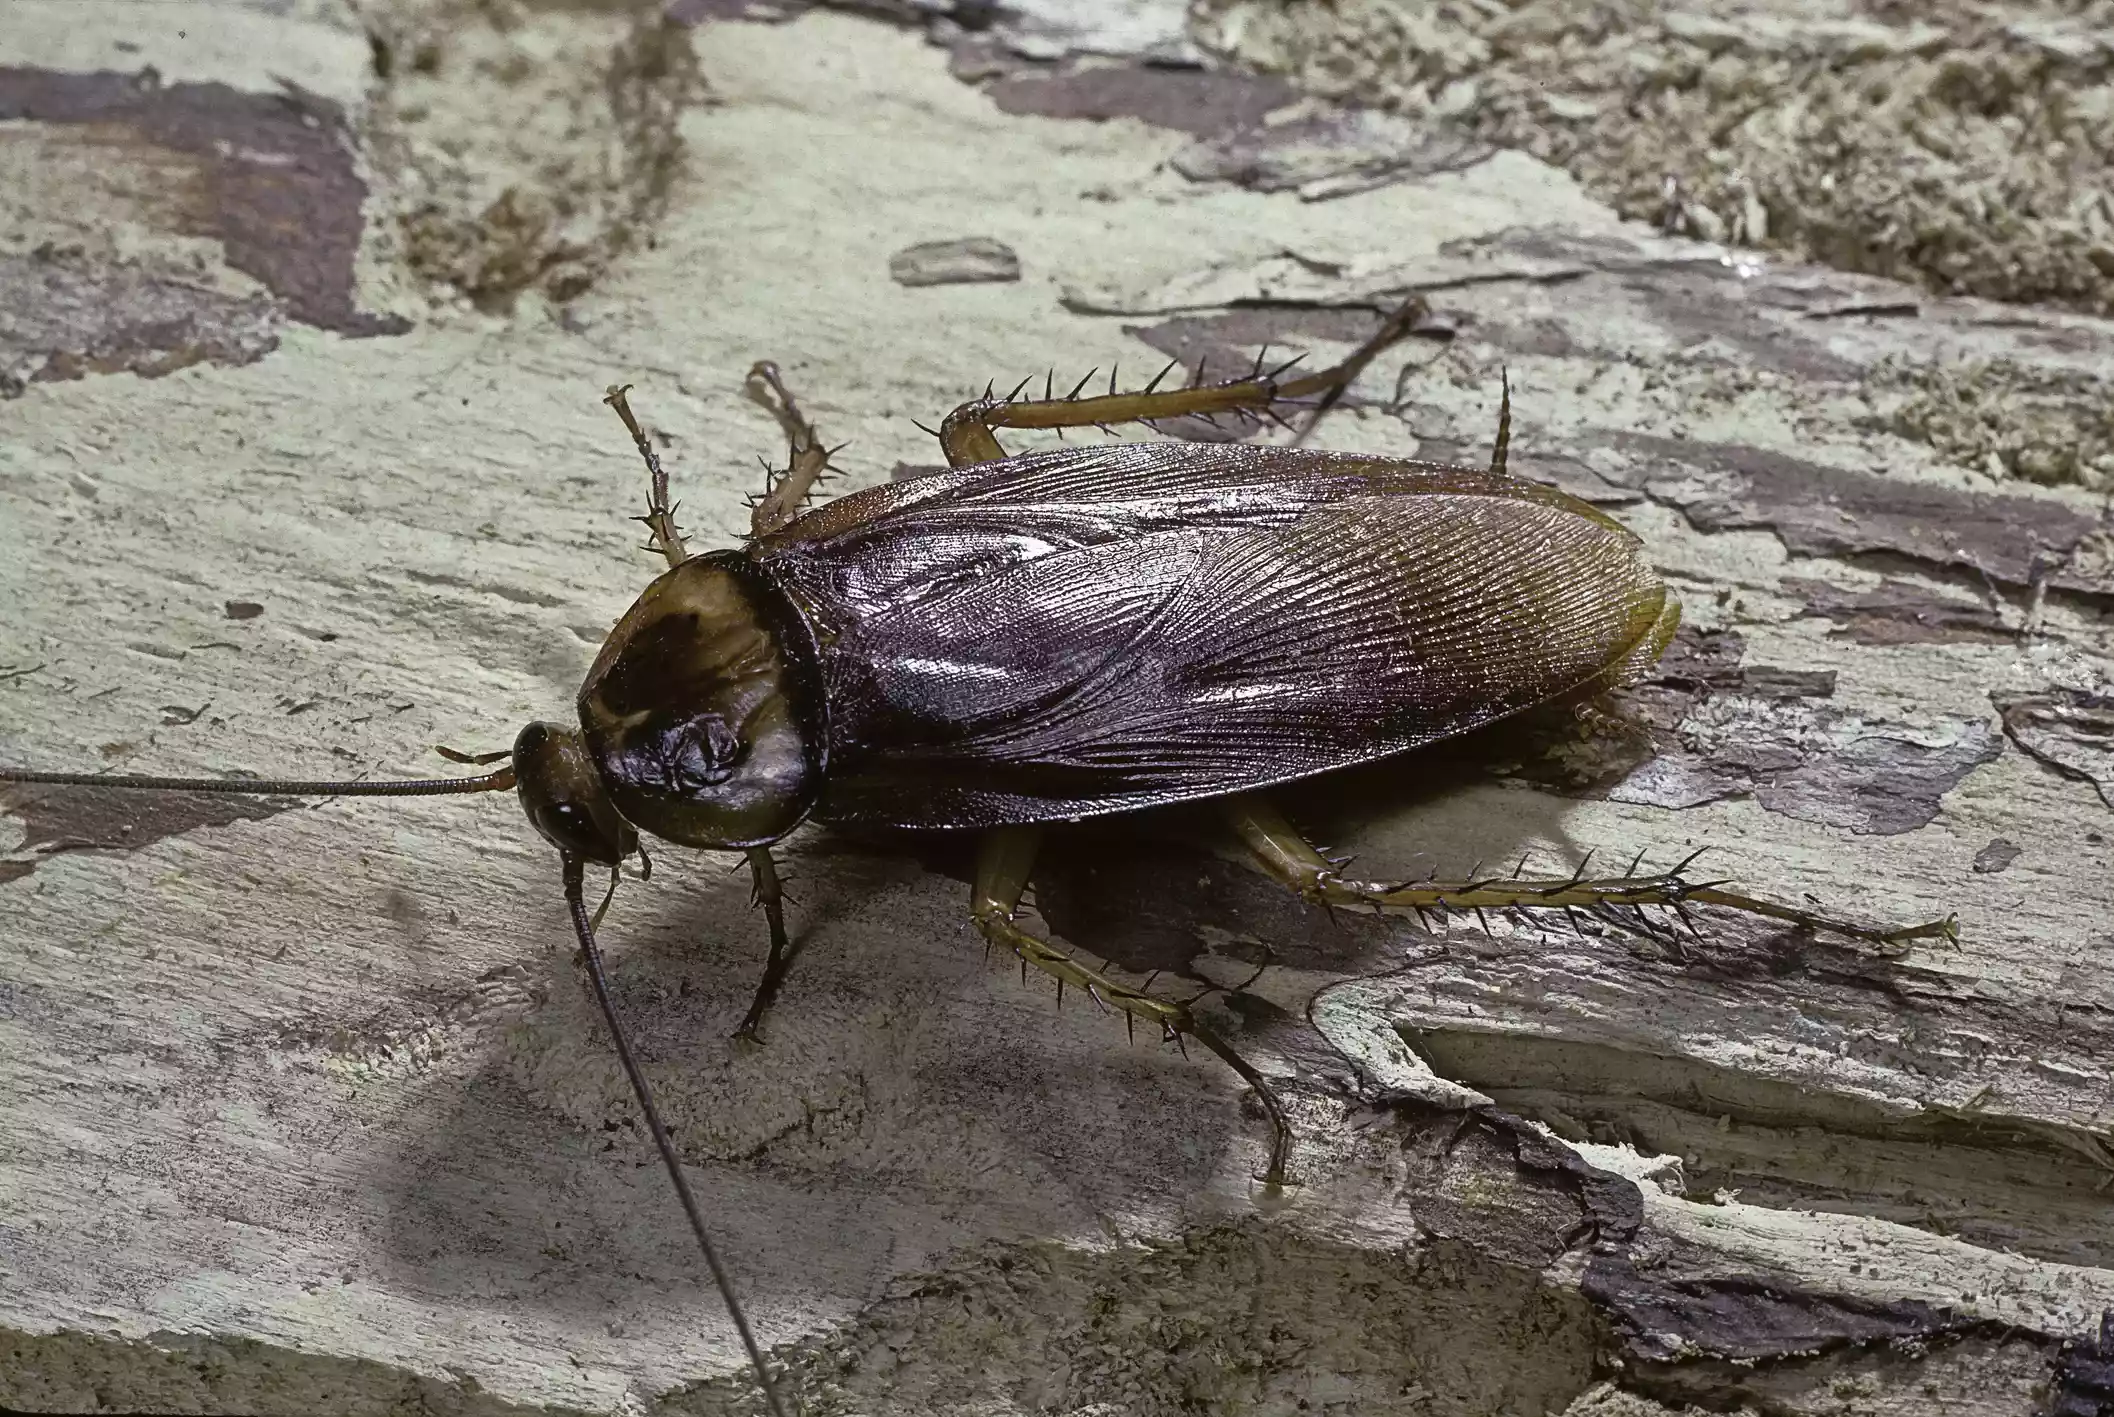 A brown cockroach with spiky legs on a tree branch